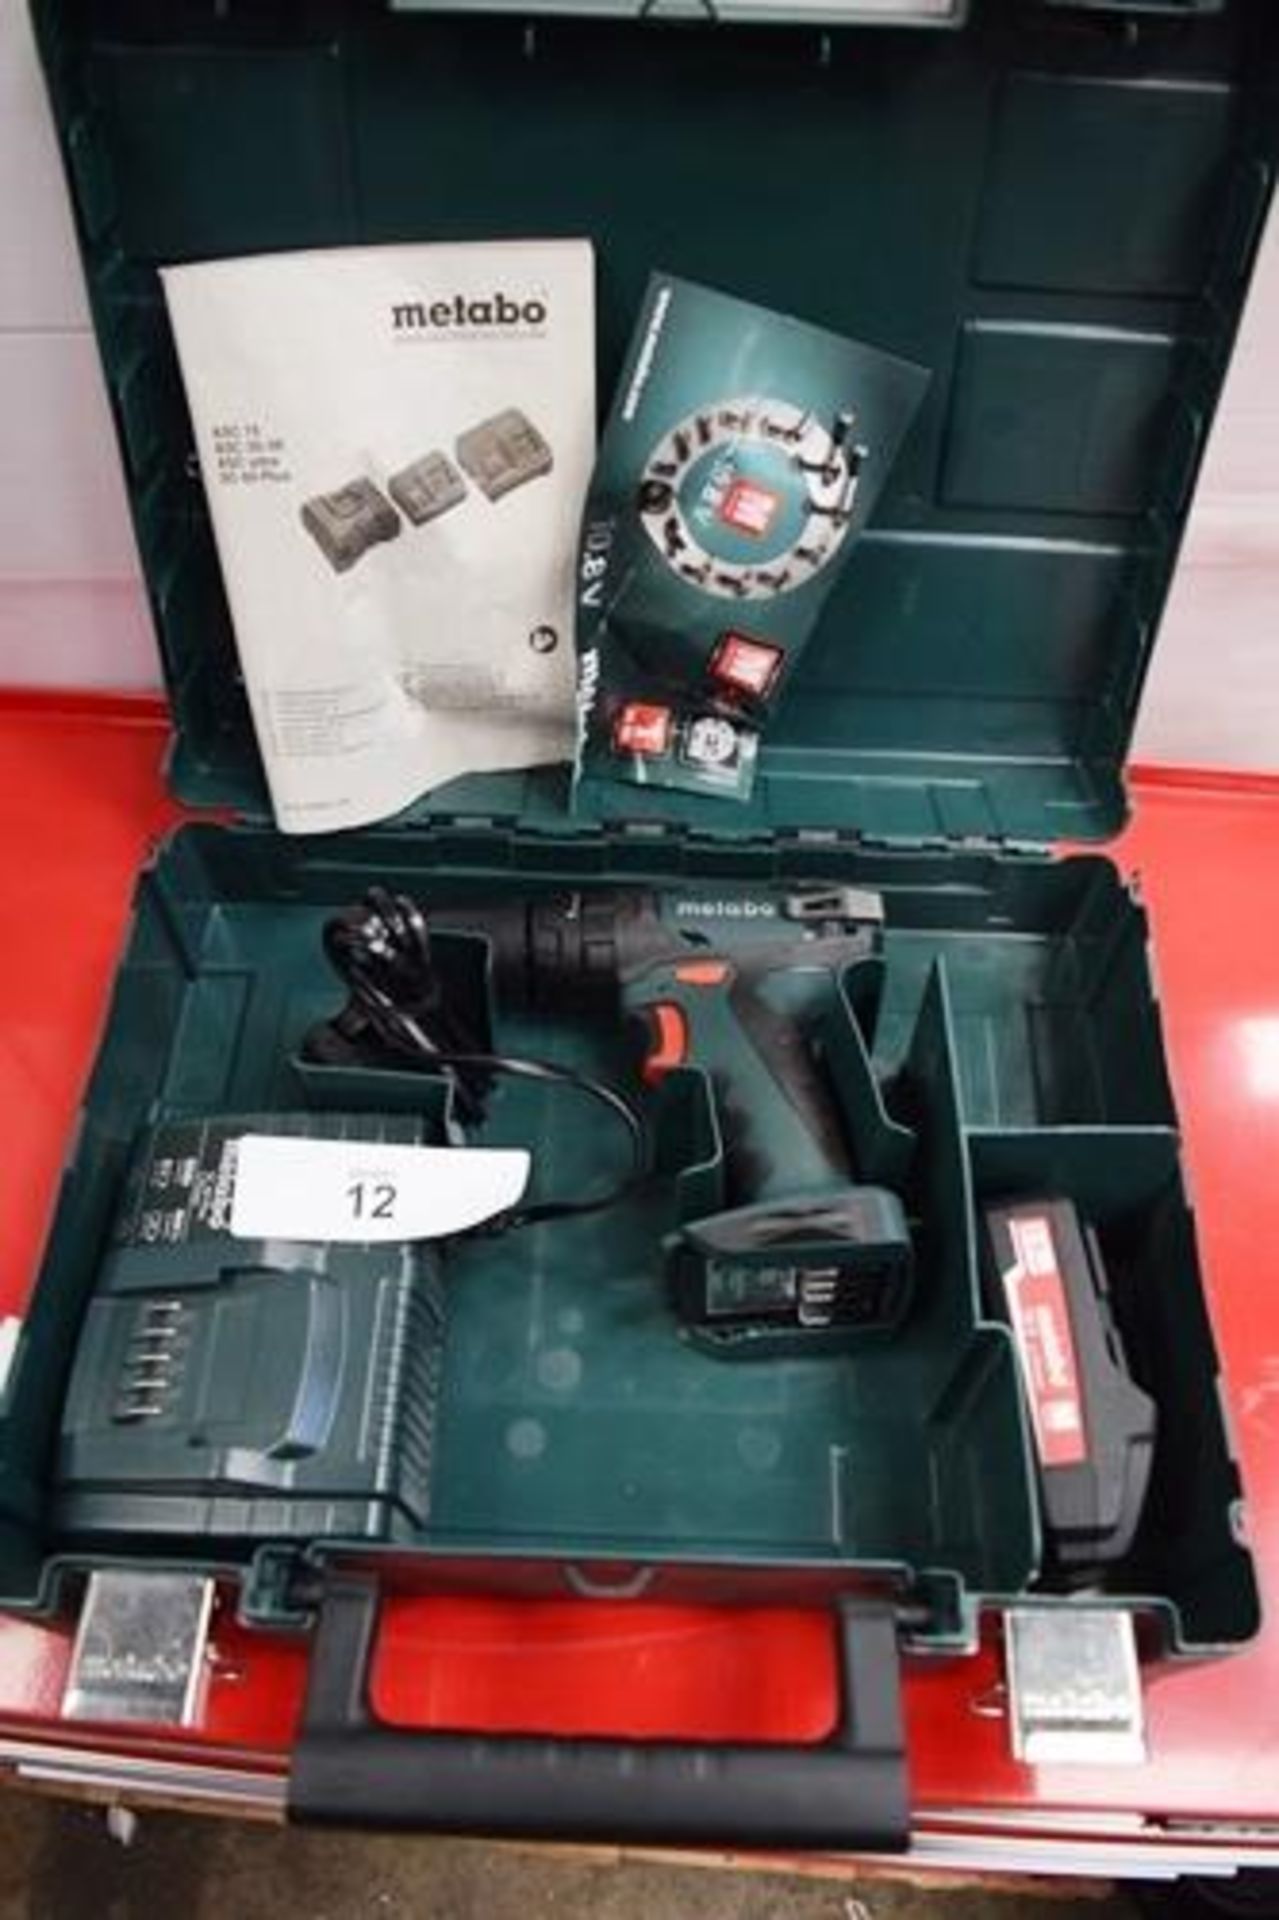 1 x Metabo 18V cordless drill, model SB18 + SC60 Plus, with 1 x 18V 2.0Ah battery, charger, manual